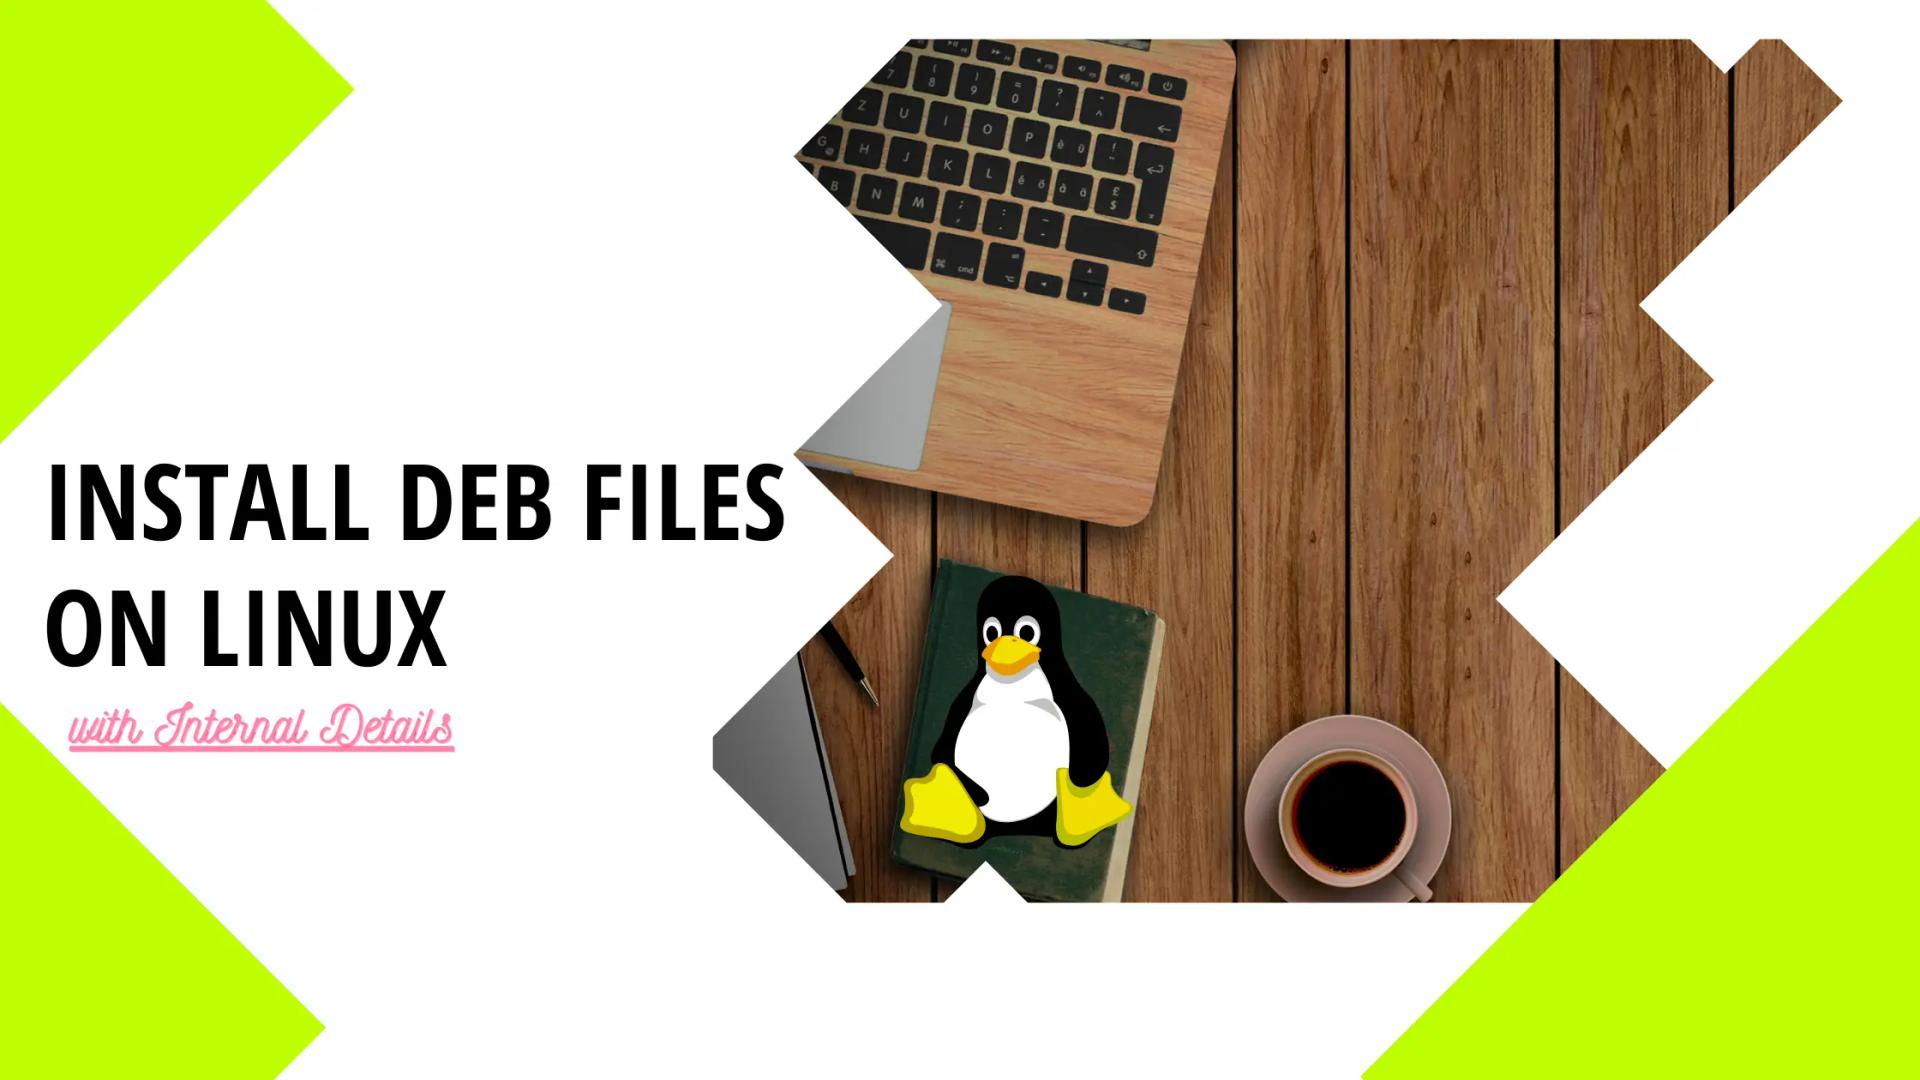 How to install deb files in Linux with Explanation